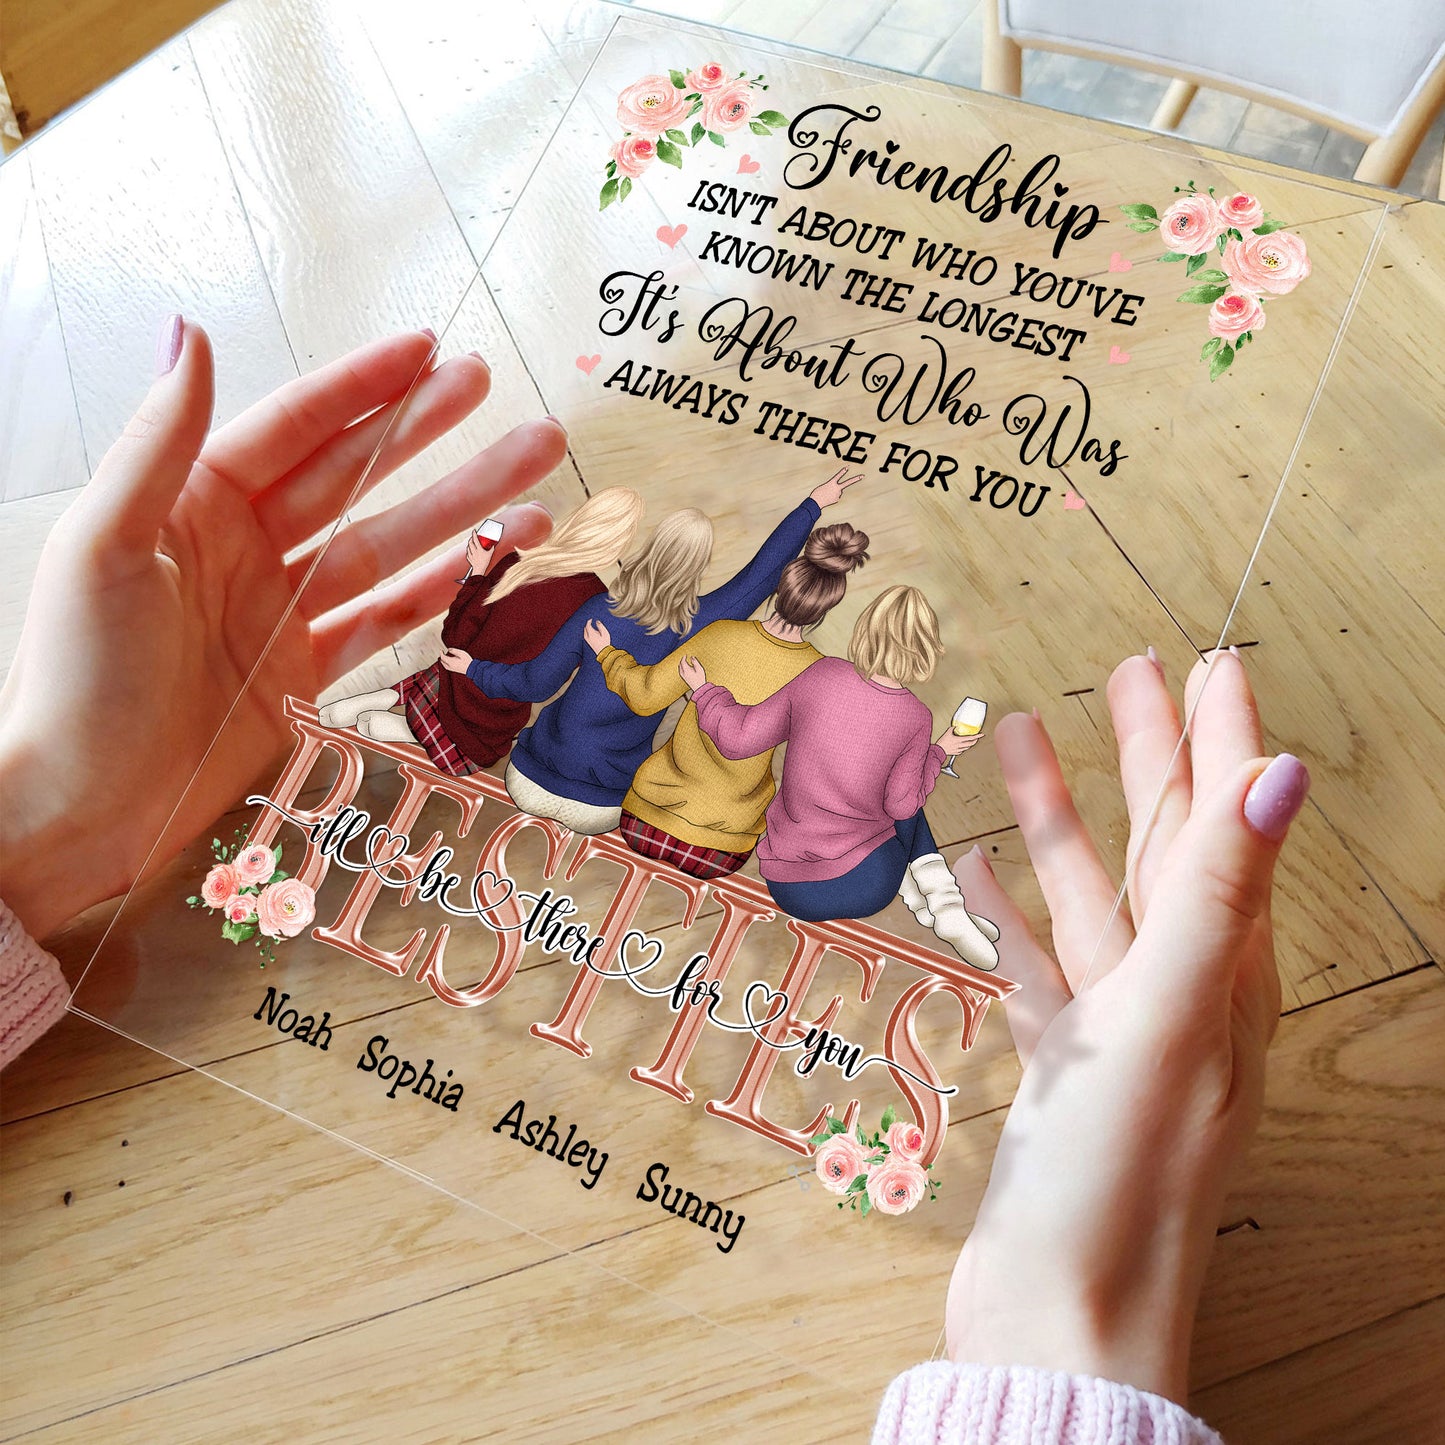 Friendship, It's About Who Was Always There For You - Personalized Acrylic Plaque - Birthday, Friendship day, Friend's Day Gift For Friends, Besties, Bff